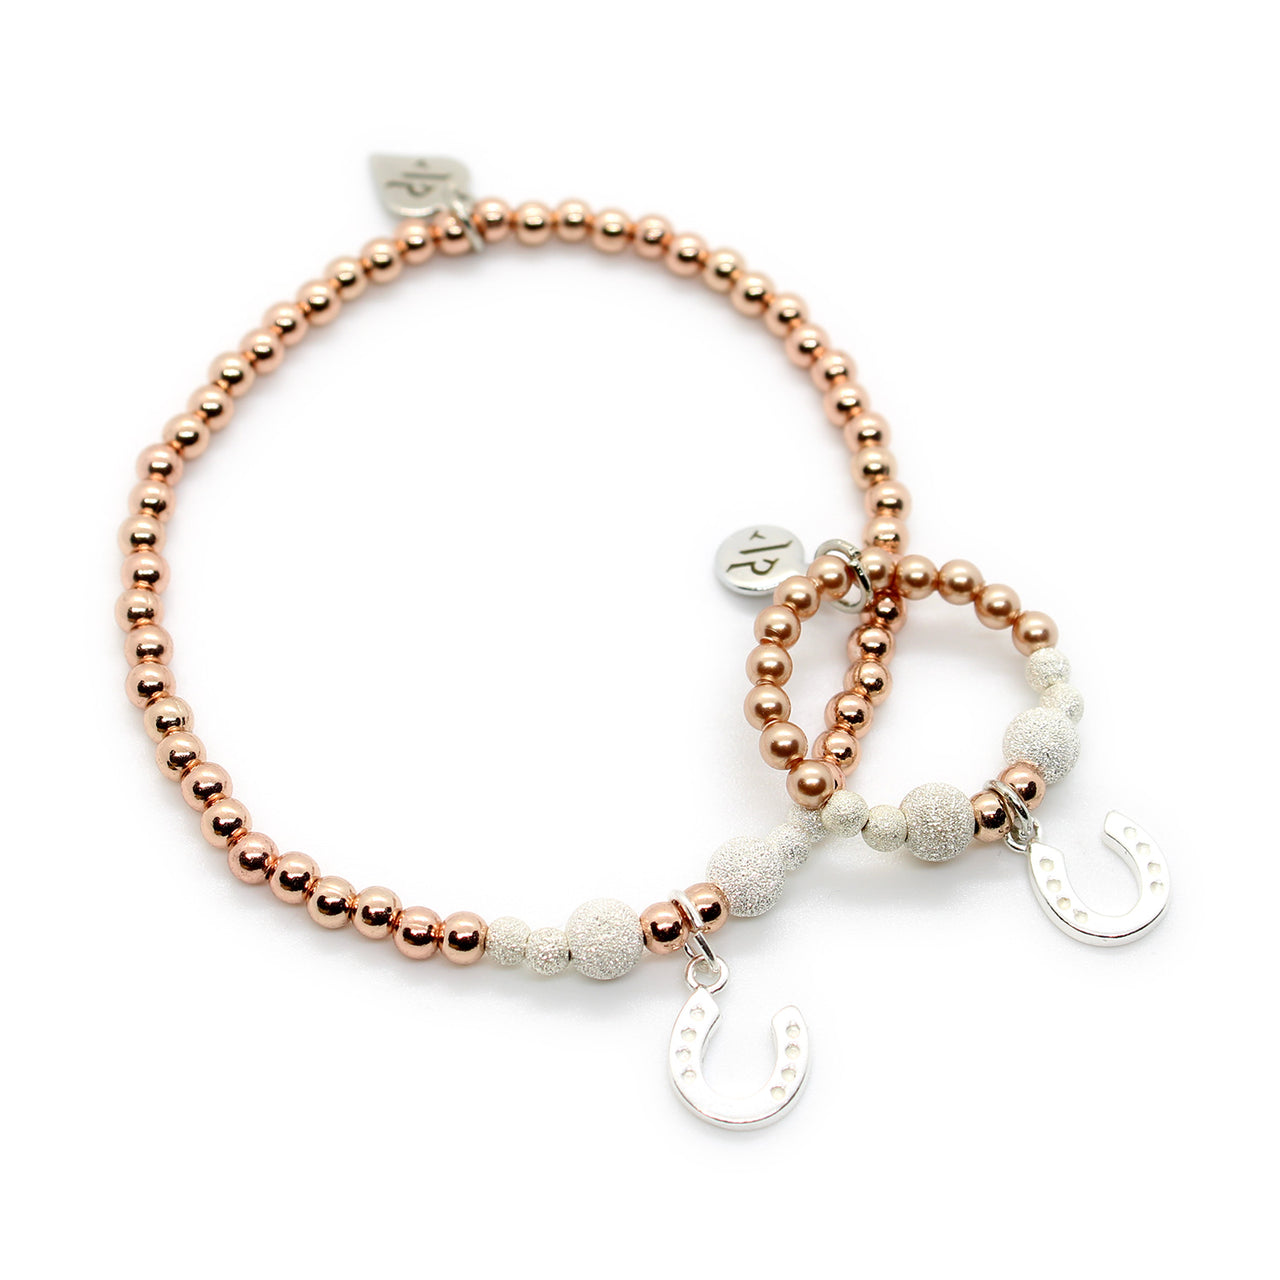 Lucky Horseshoe Charm Bracelet & Ring Set | Frosted Silver & Rose Gold Beads